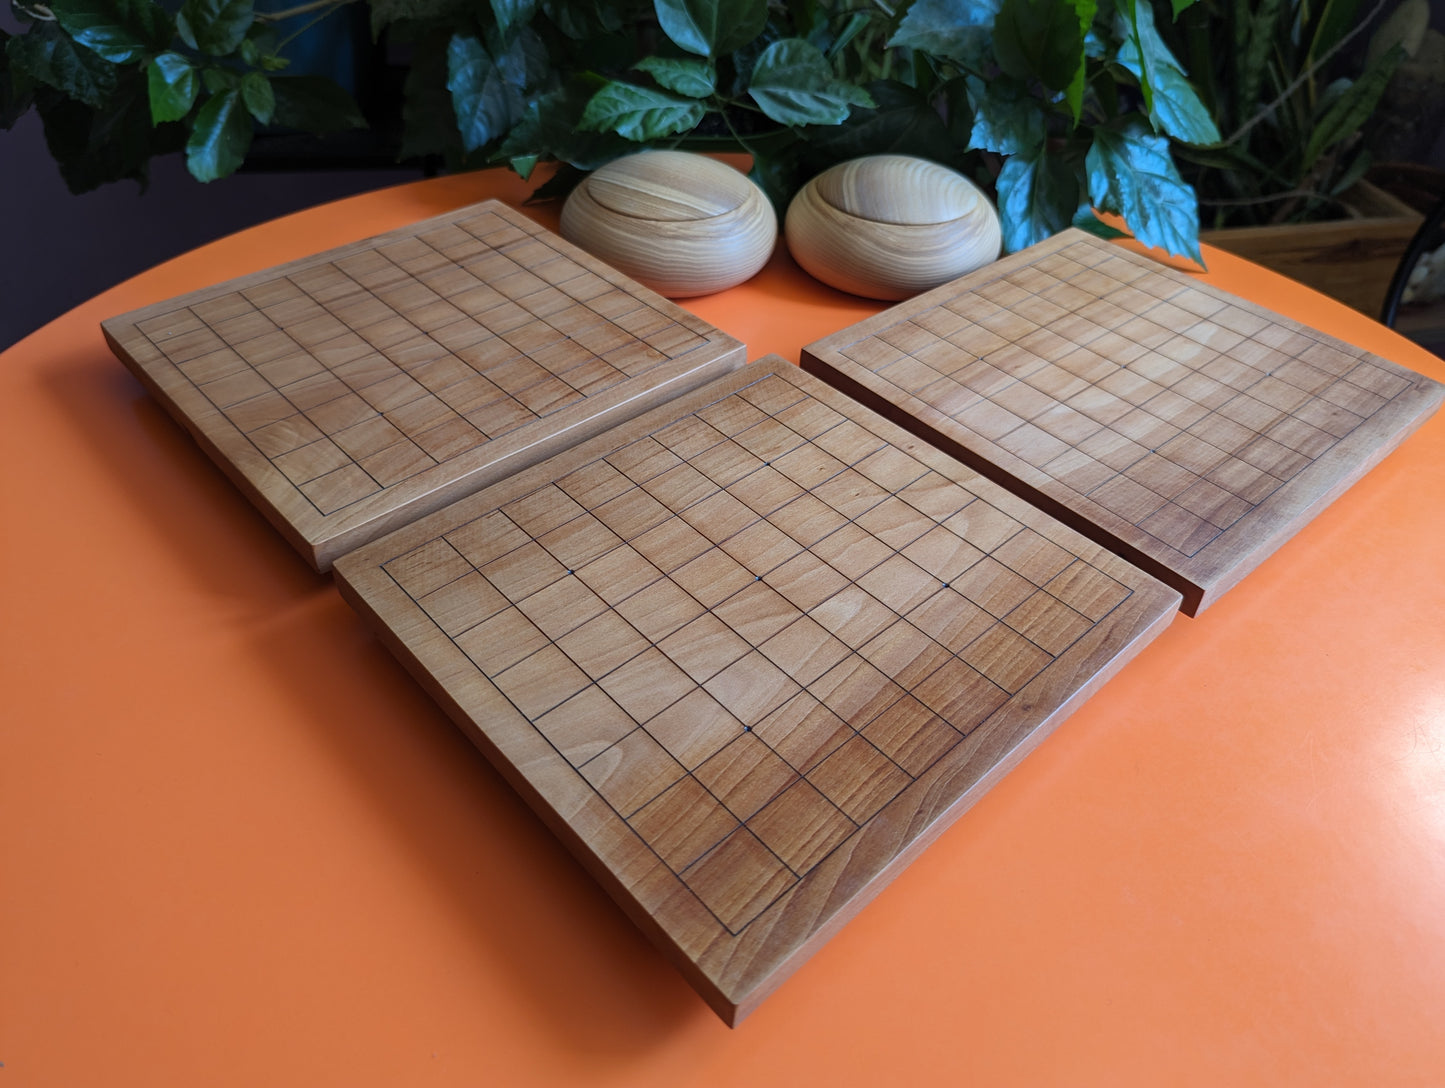 Game Go solid pear wood 9x9 Goban. Hand carved board with YunZi stones